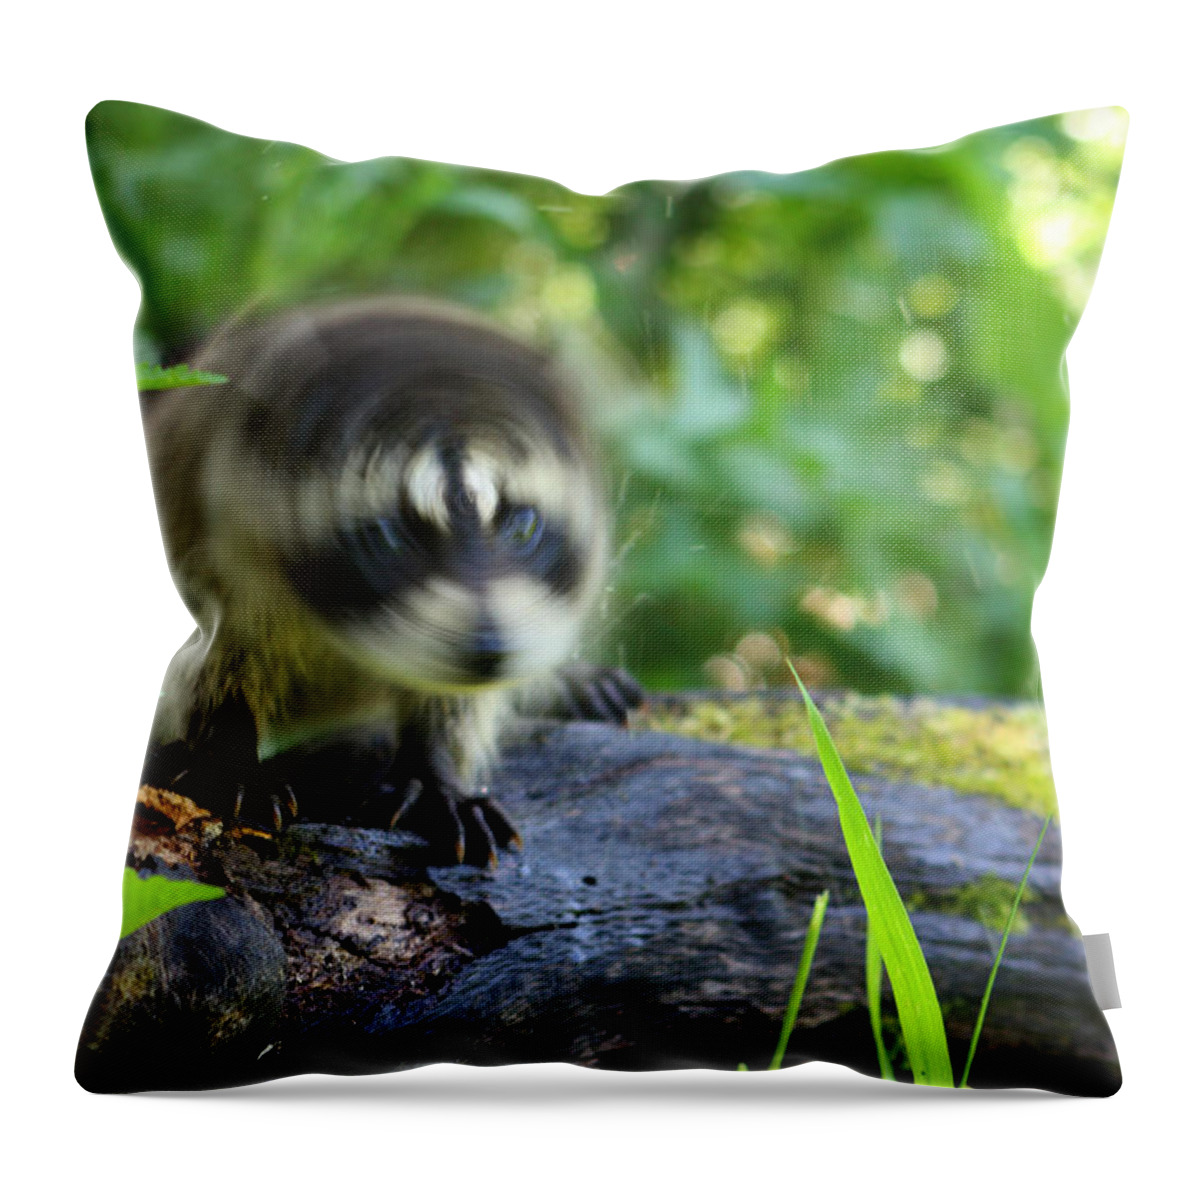 Racoon Throw Pillow featuring the photograph Raccoon #3 by Amanda Stadther